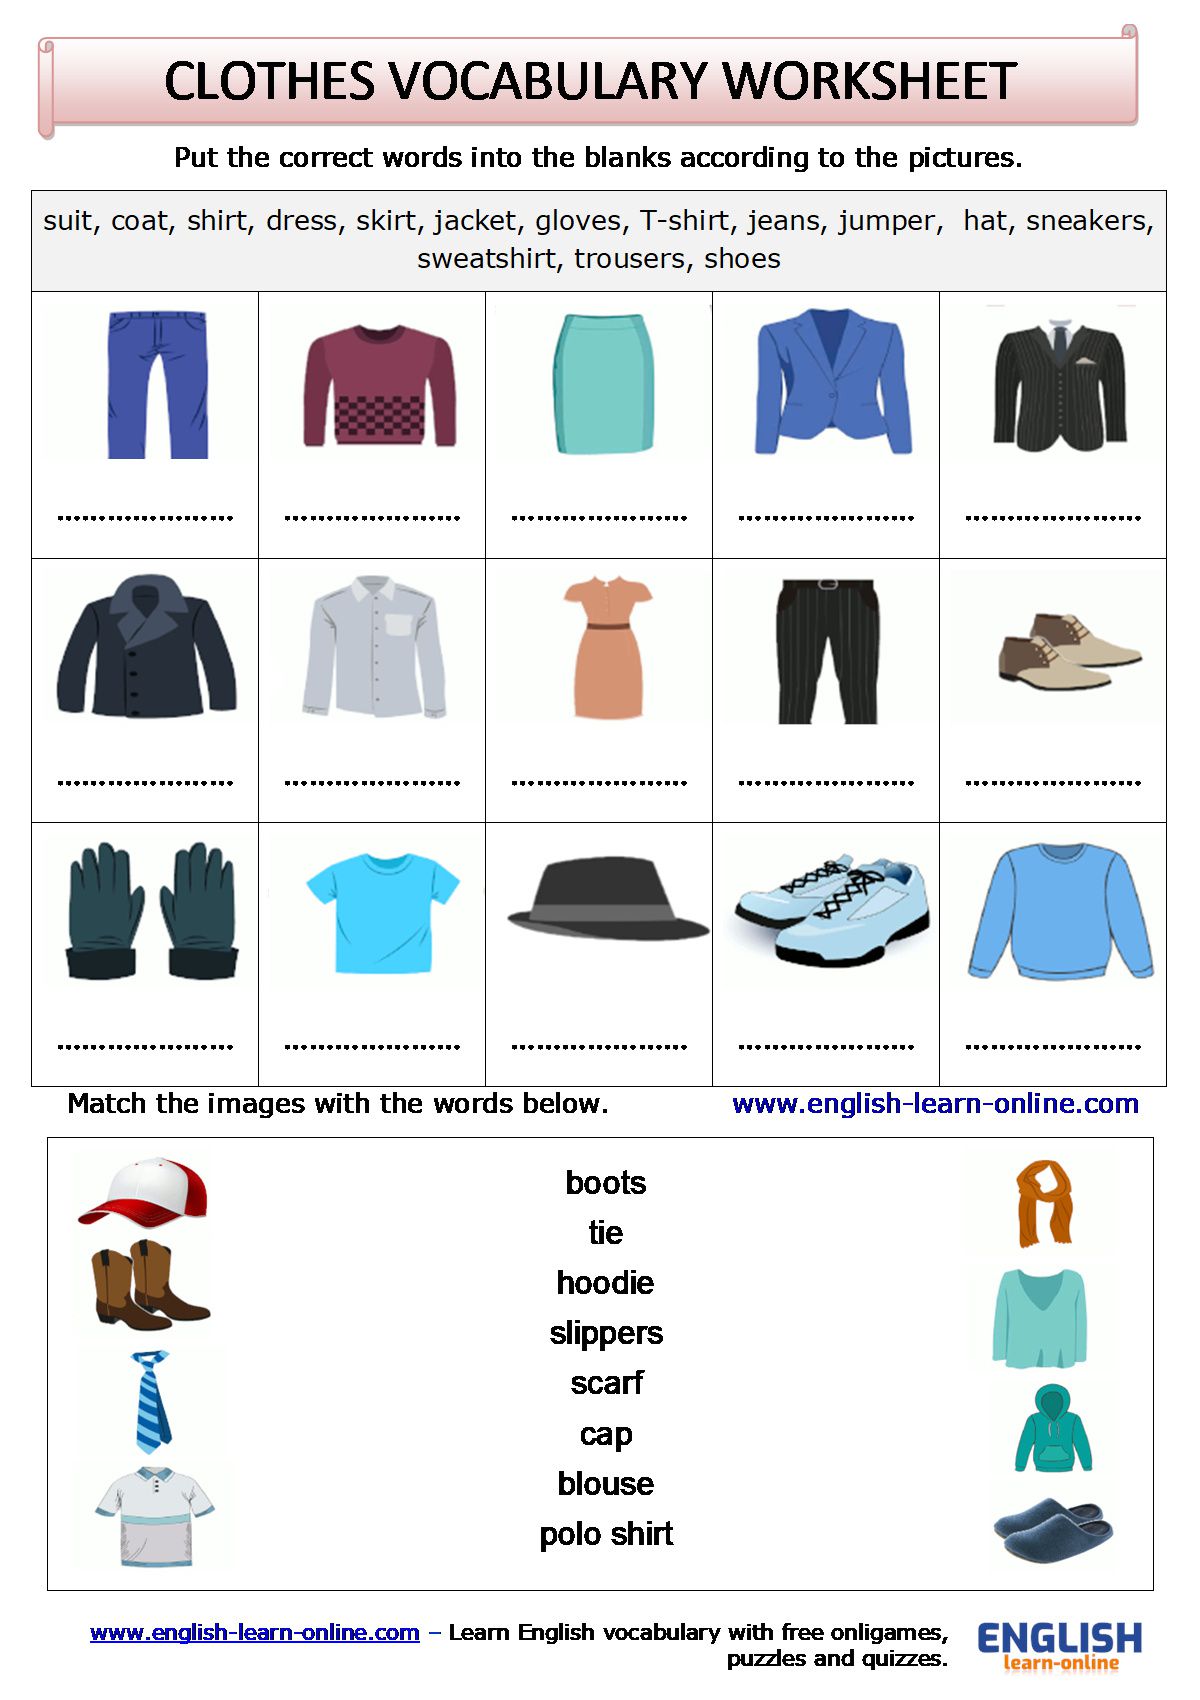 A list of different TYPES OF CLOTHES - SewGuide  English clothes, Clothes,  Instagram ideas post